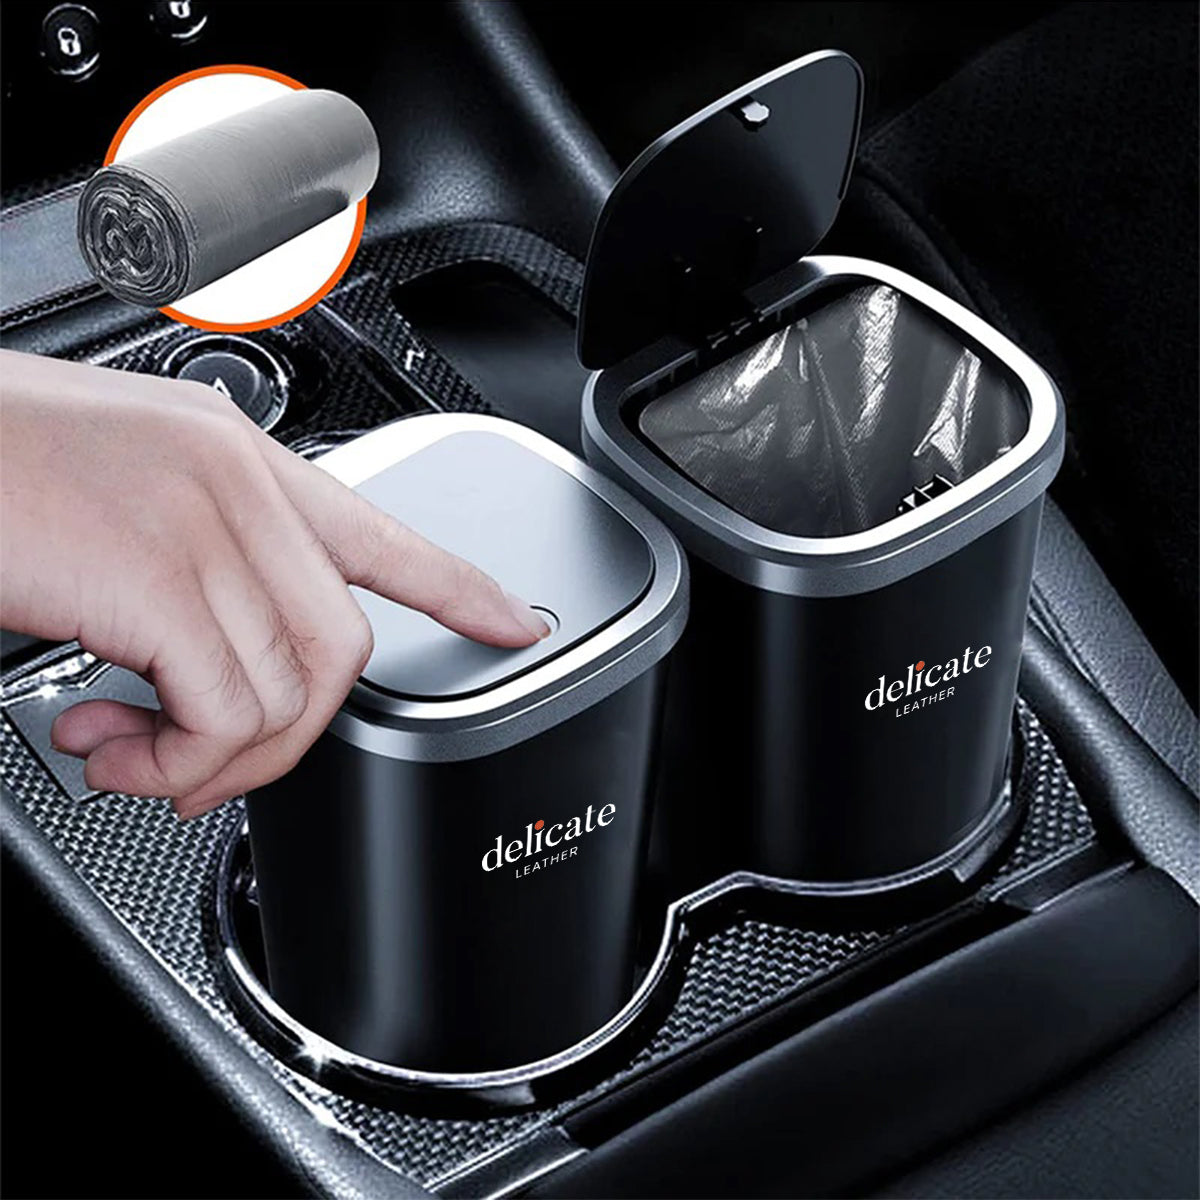 Car Trash Cans, Custom For Your Cars, Compact & Durable Car Accessories for Interior Use 2 Pack, Practical Car Organizers and Storage Cups with Pop-Up Open, Car Accessories CA11993